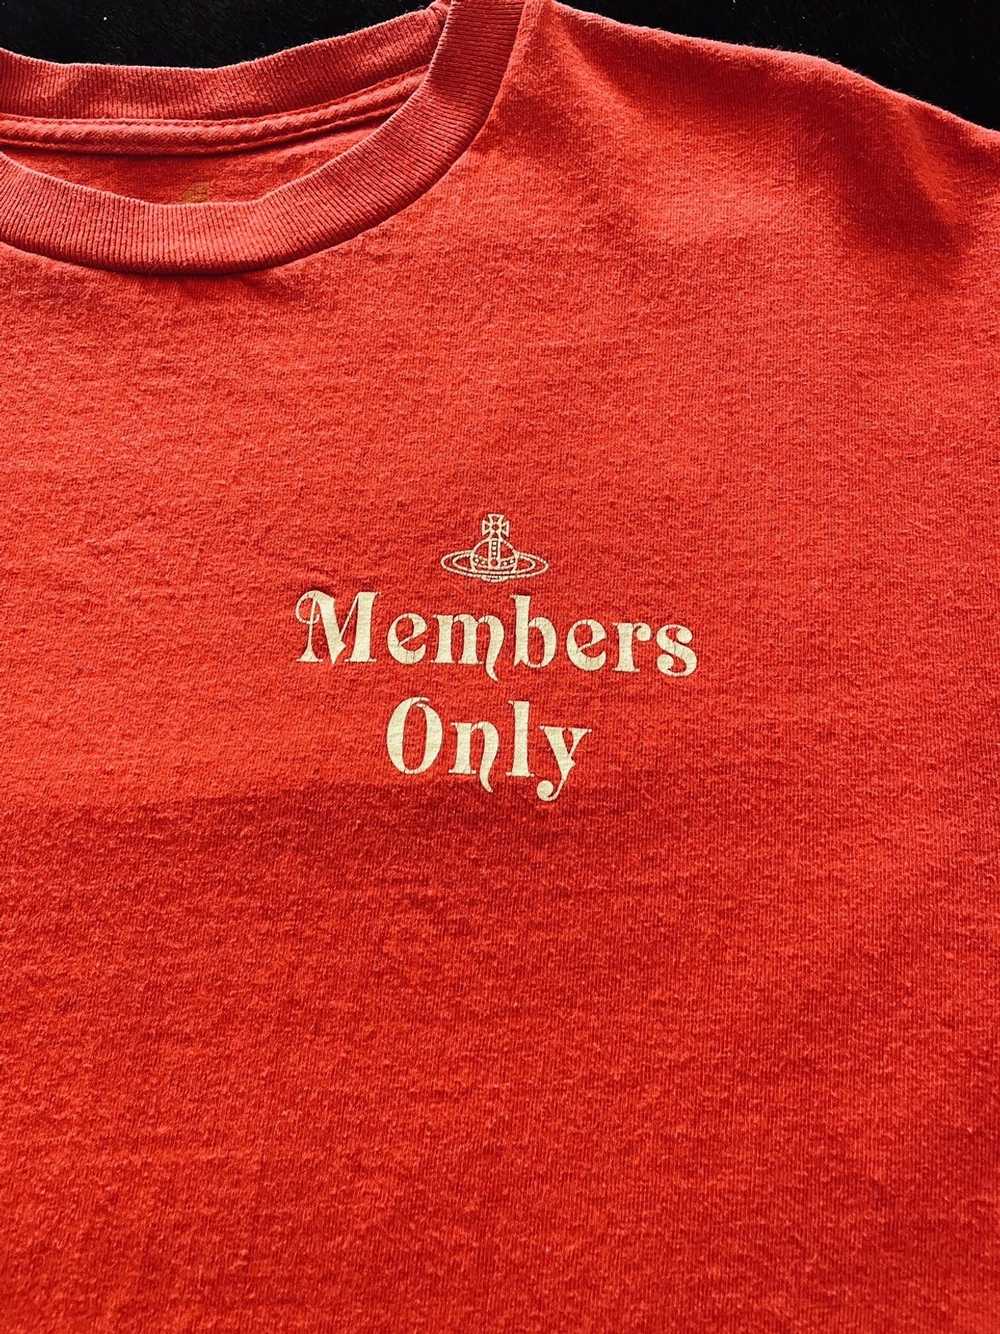 Members Only 4hunnid Members Only Tee - image 2